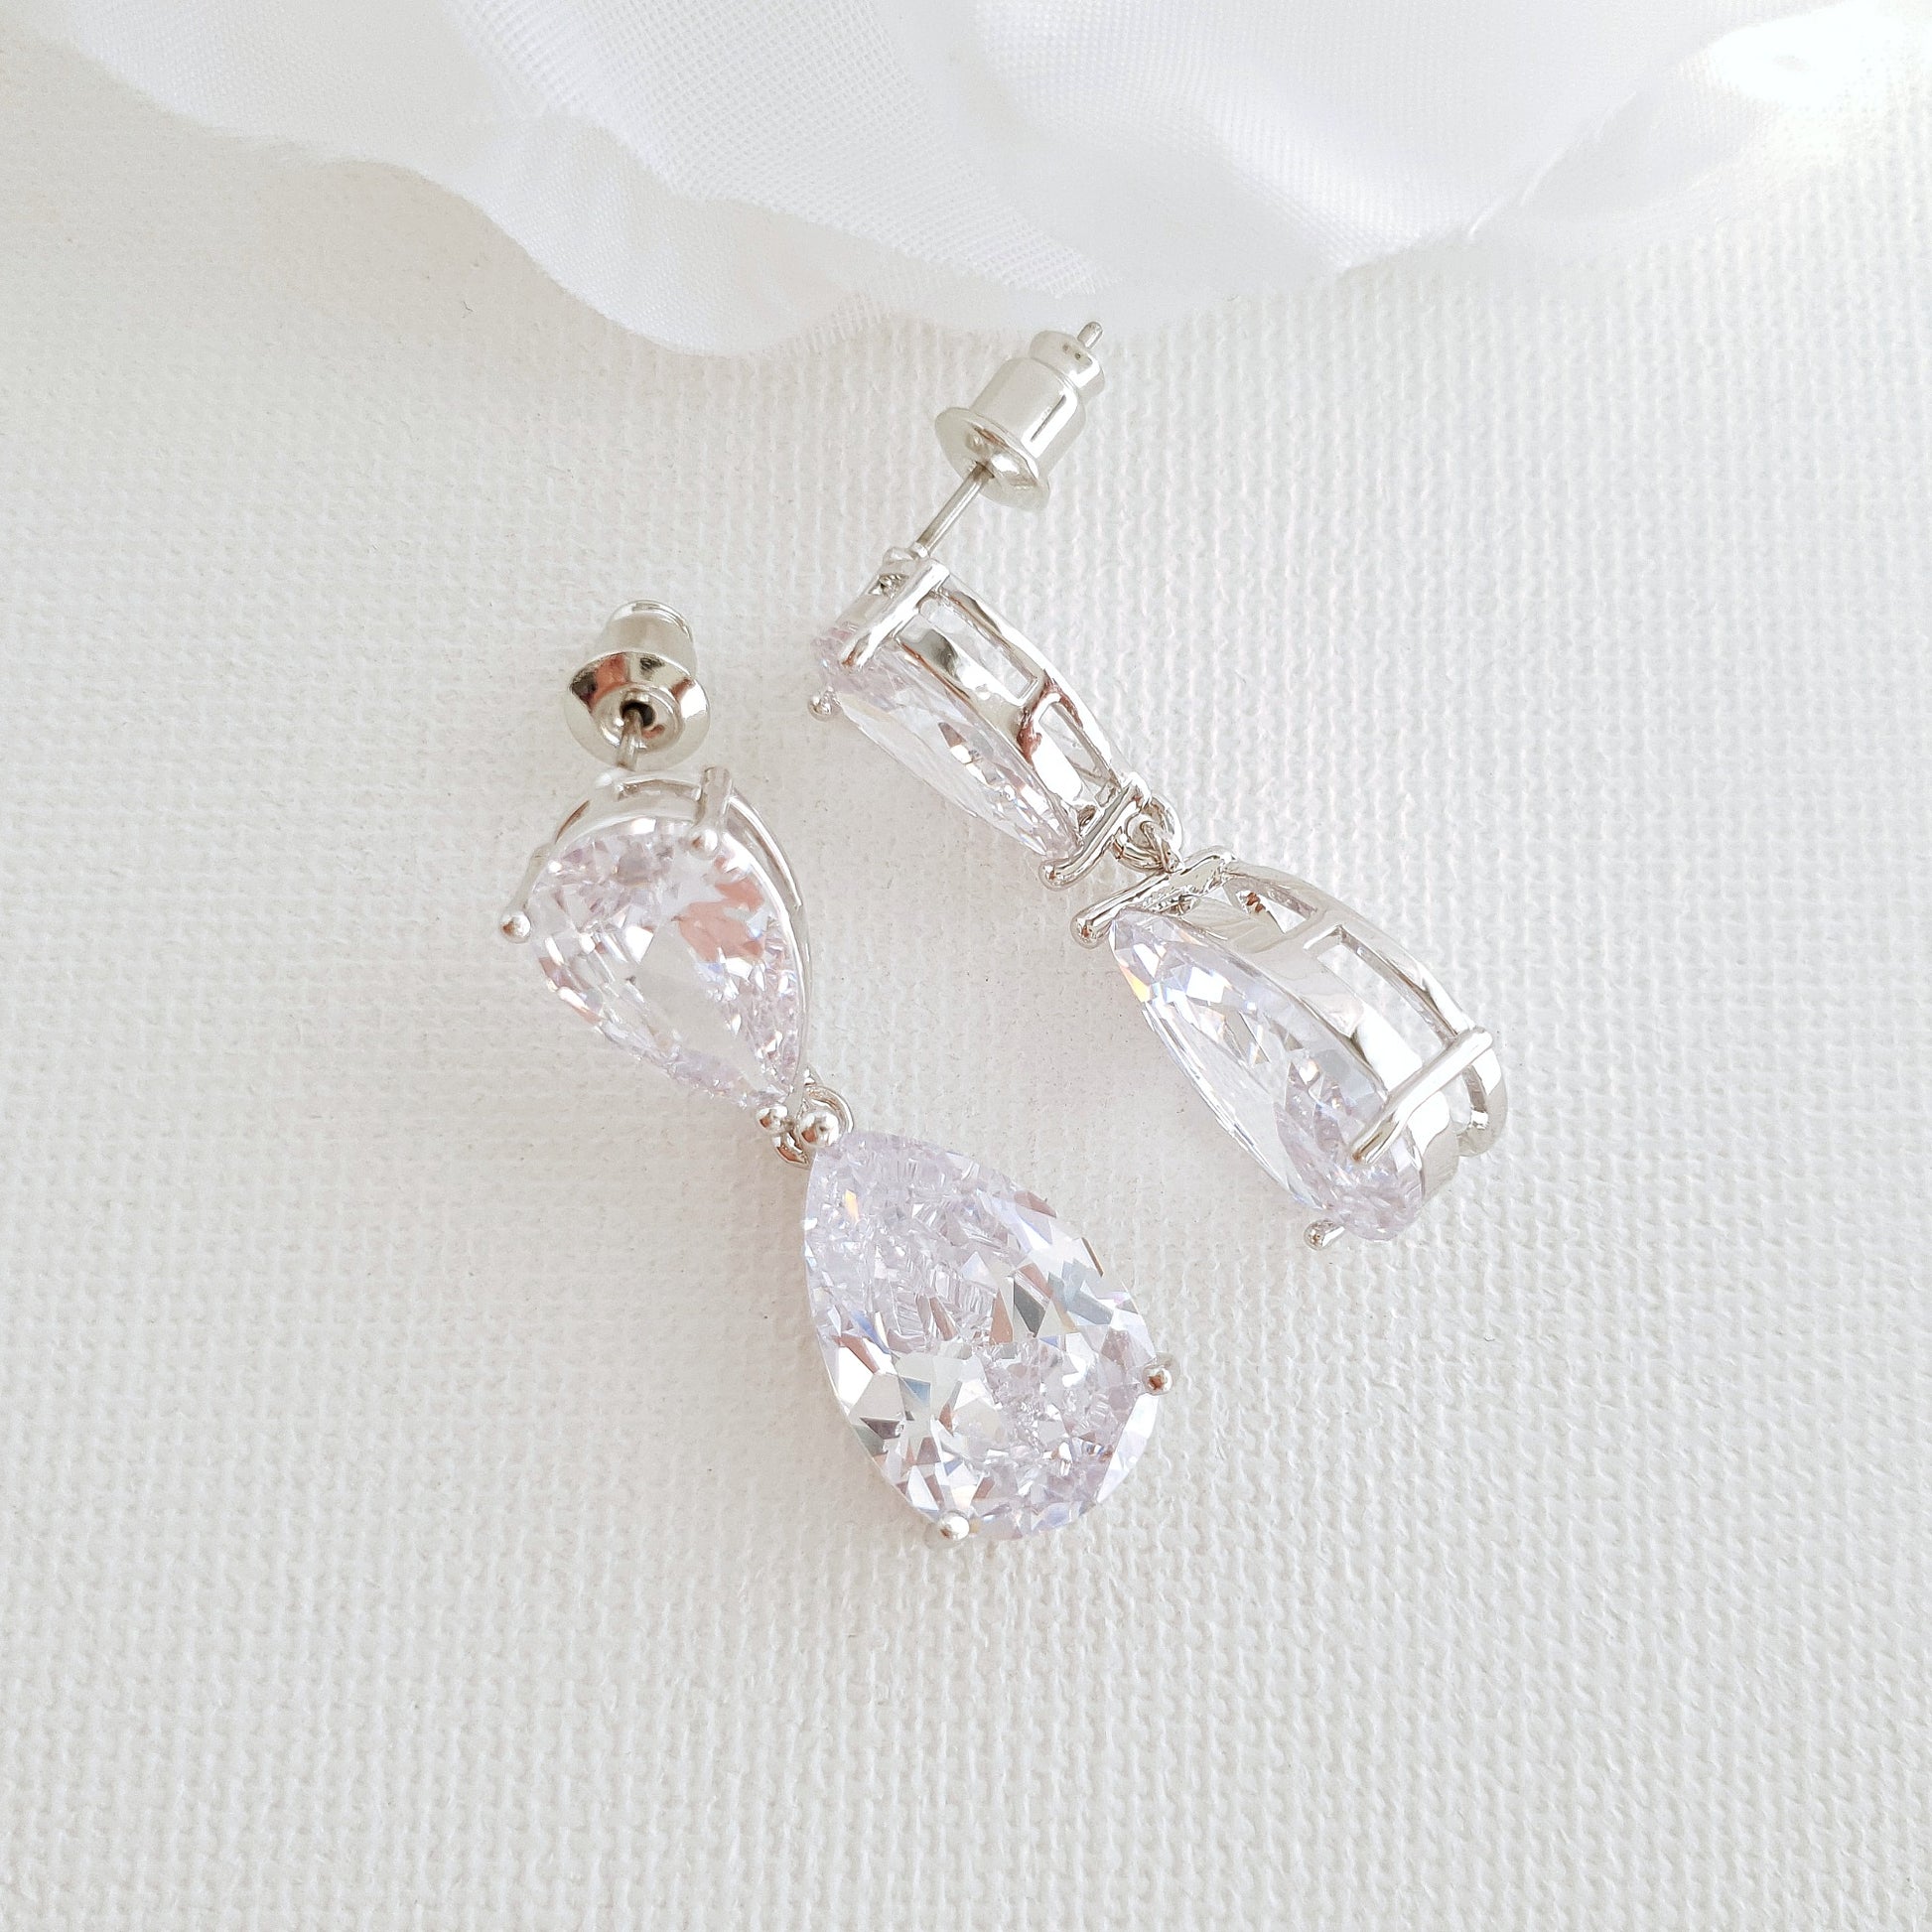 Ear post Diamante Earrings for Brides and bridesmaids with pierced ears- Poetry Designs